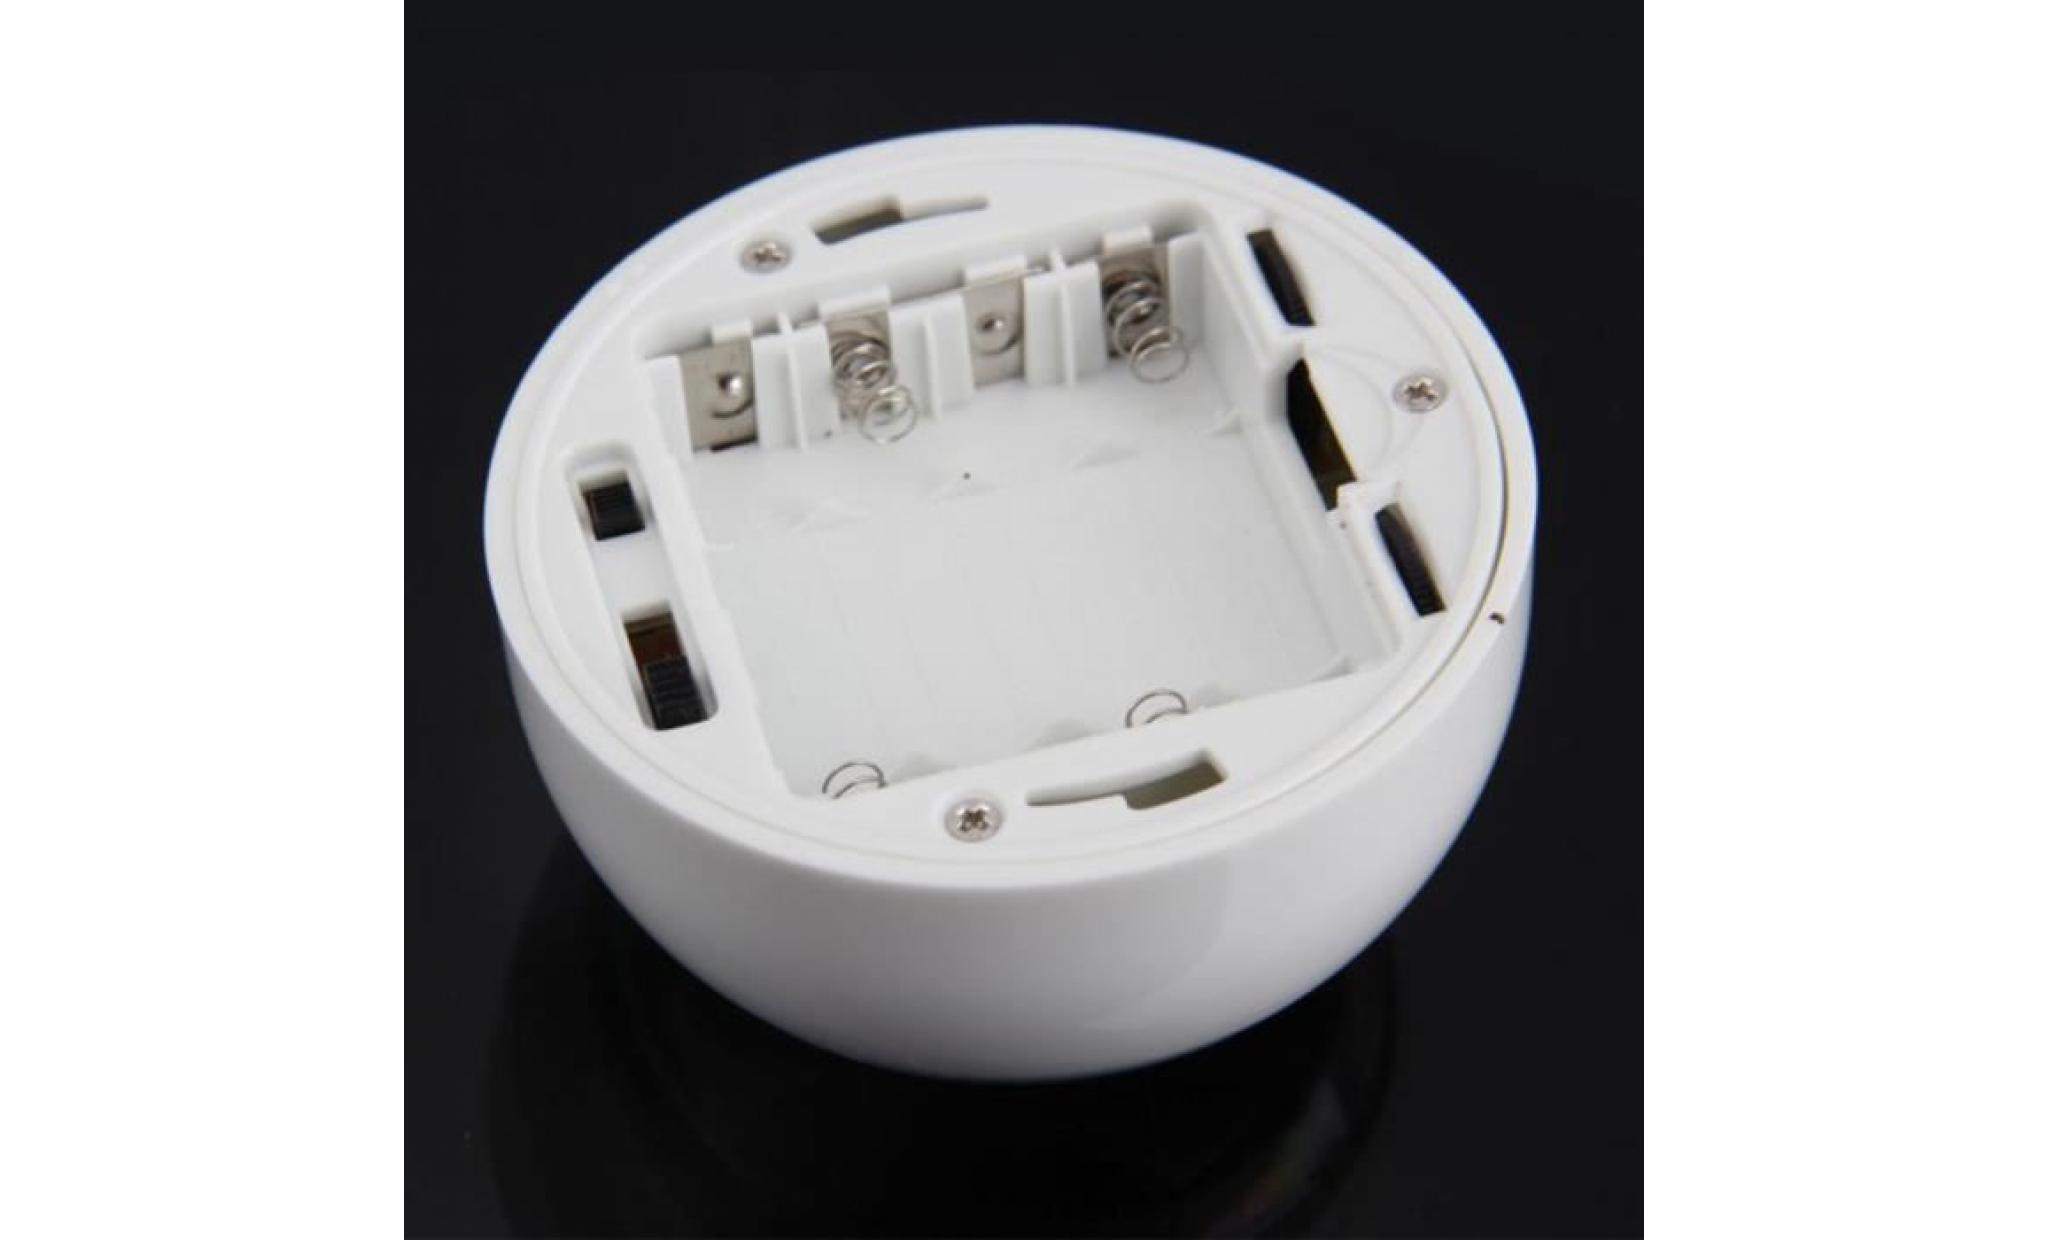 pir auto sensor motion detector lamp 6 leds light wireless infrared home outdoor pageare1051 pageare1051